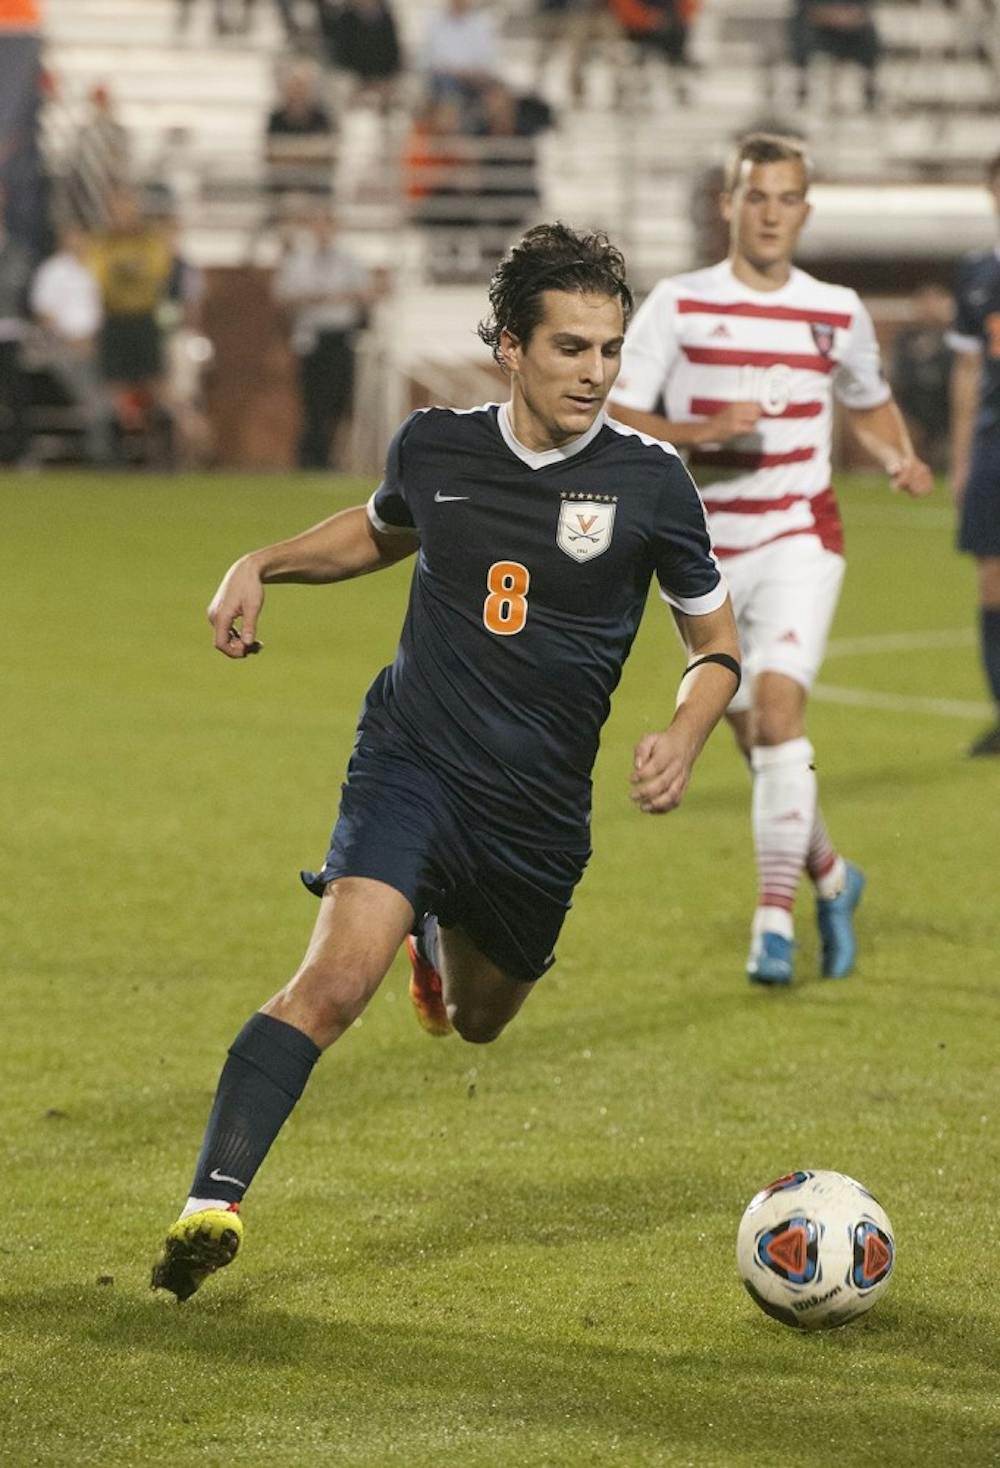 <p>Junior midfielder Pablo Aguilar's game-winning golden goal in double overtime to beat Vermont went viral, highlighting a thrilling fall semester for Virginia sports.&nbsp;</p>